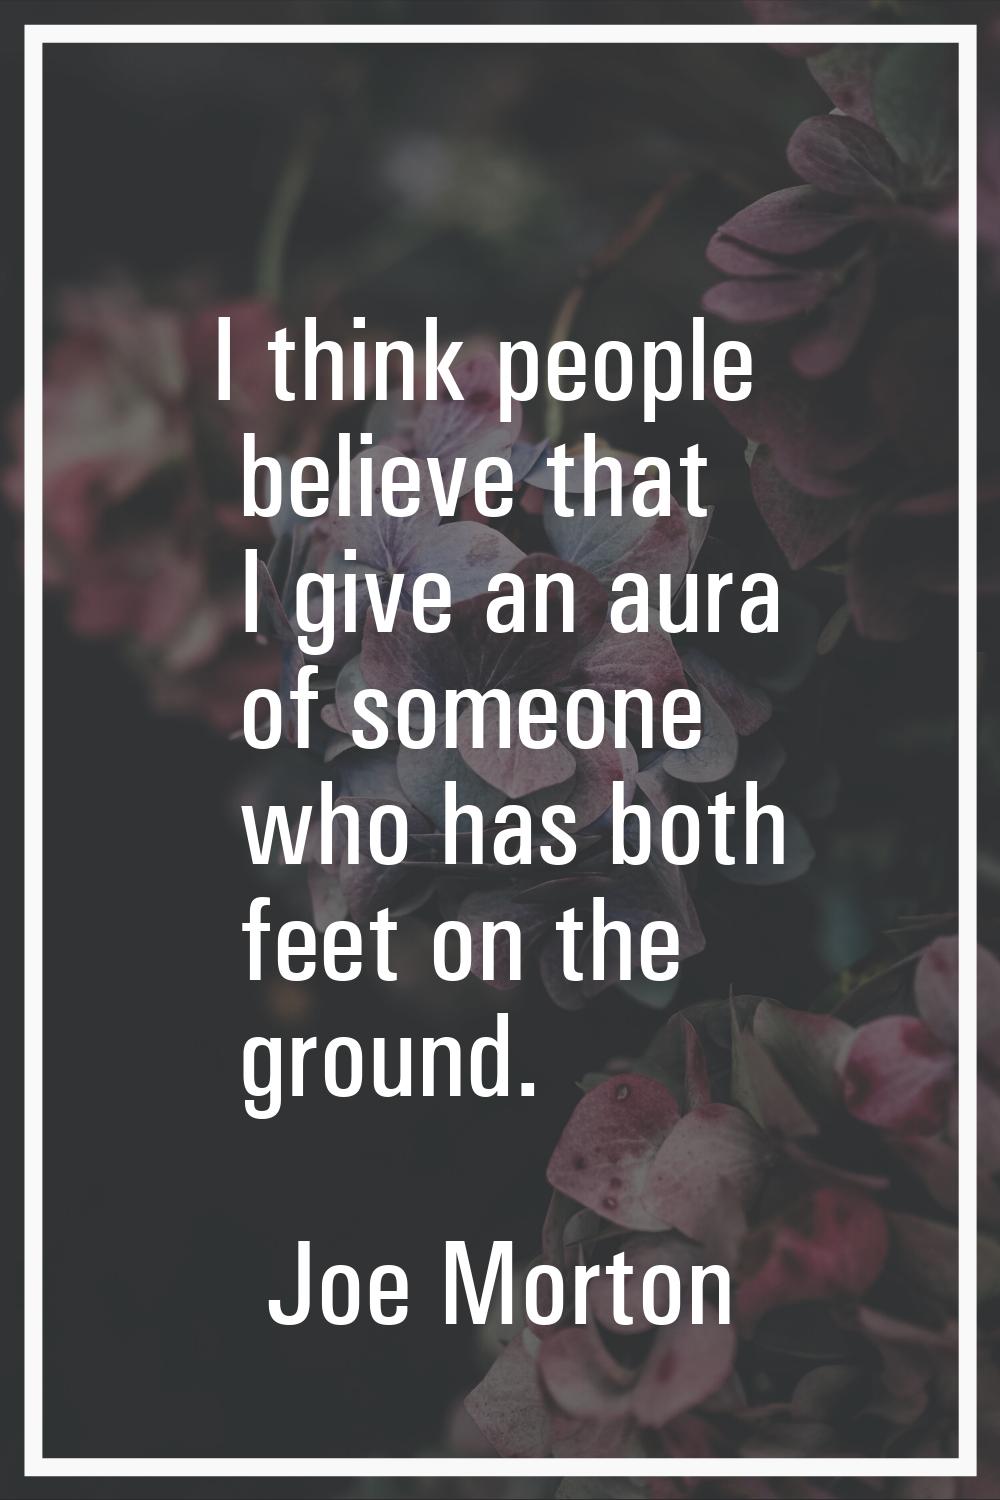 I think people believe that I give an aura of someone who has both feet on the ground.